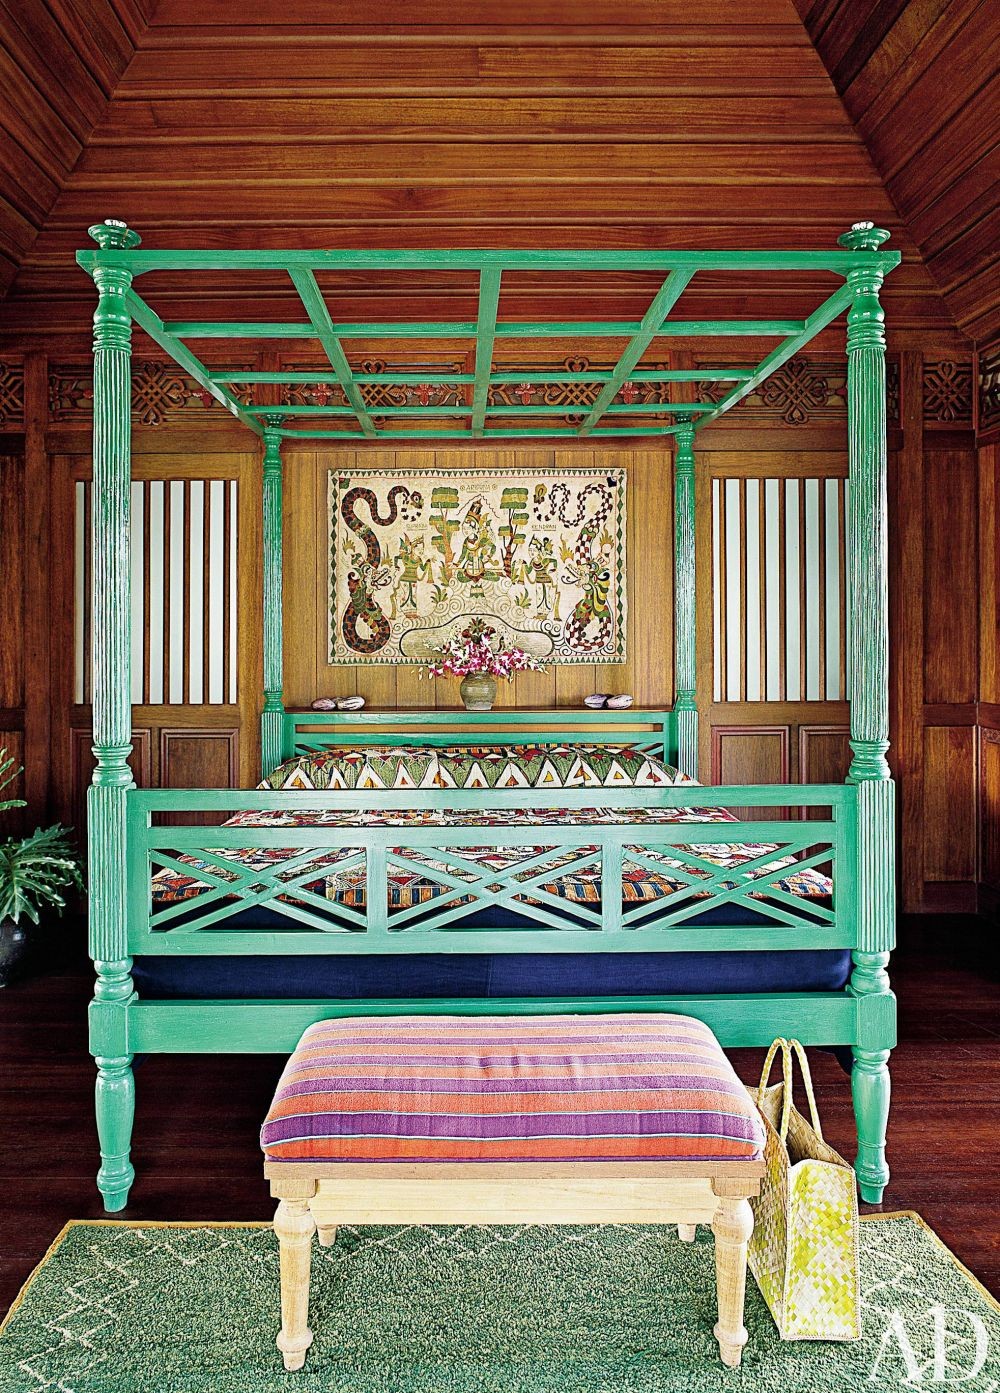 Eccentric minty four poster bed